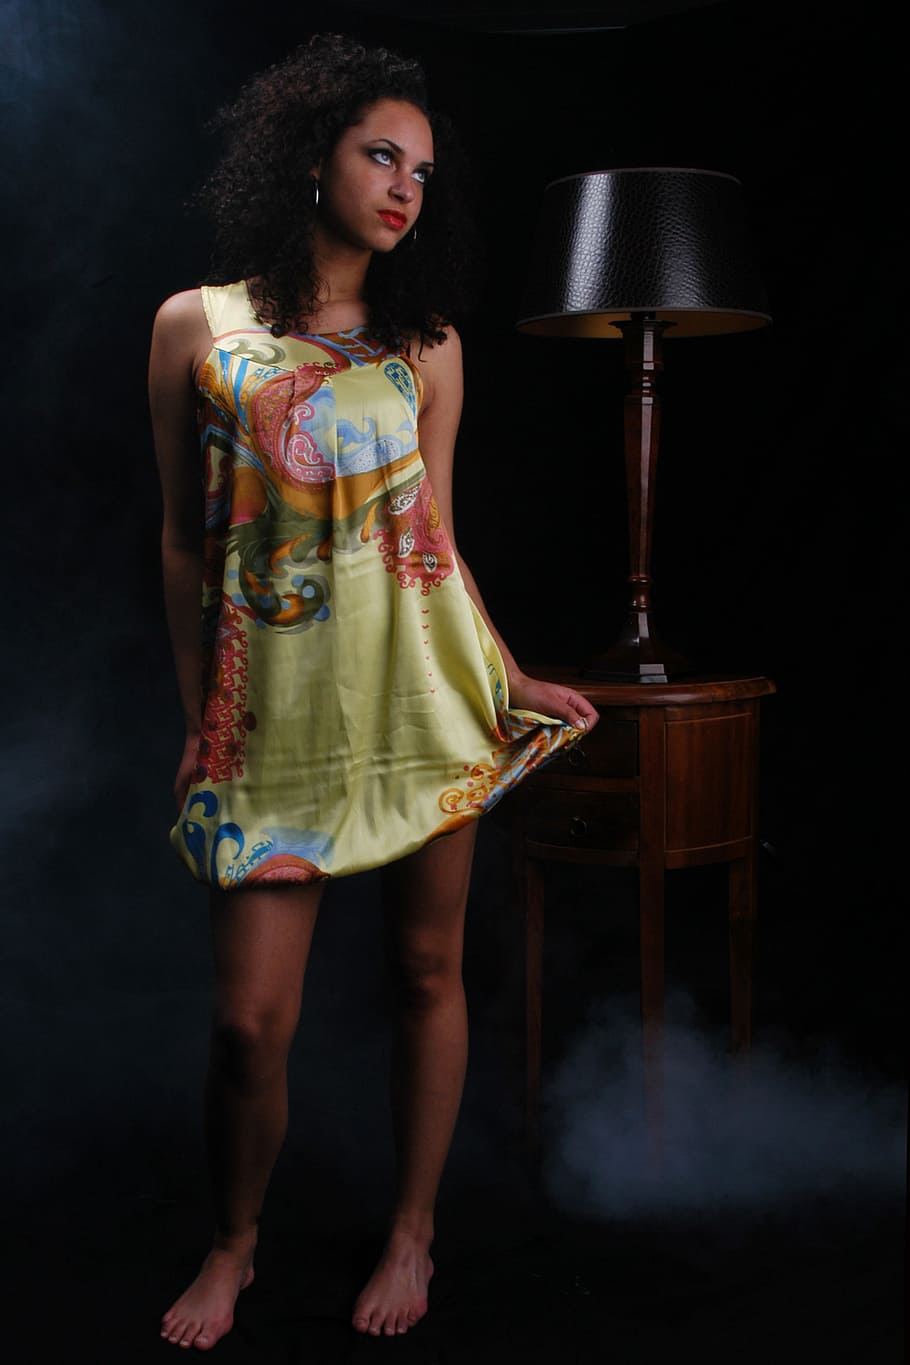 woman, wearing, green, red, blue, mini dress, table, lamp, young woman, beauty